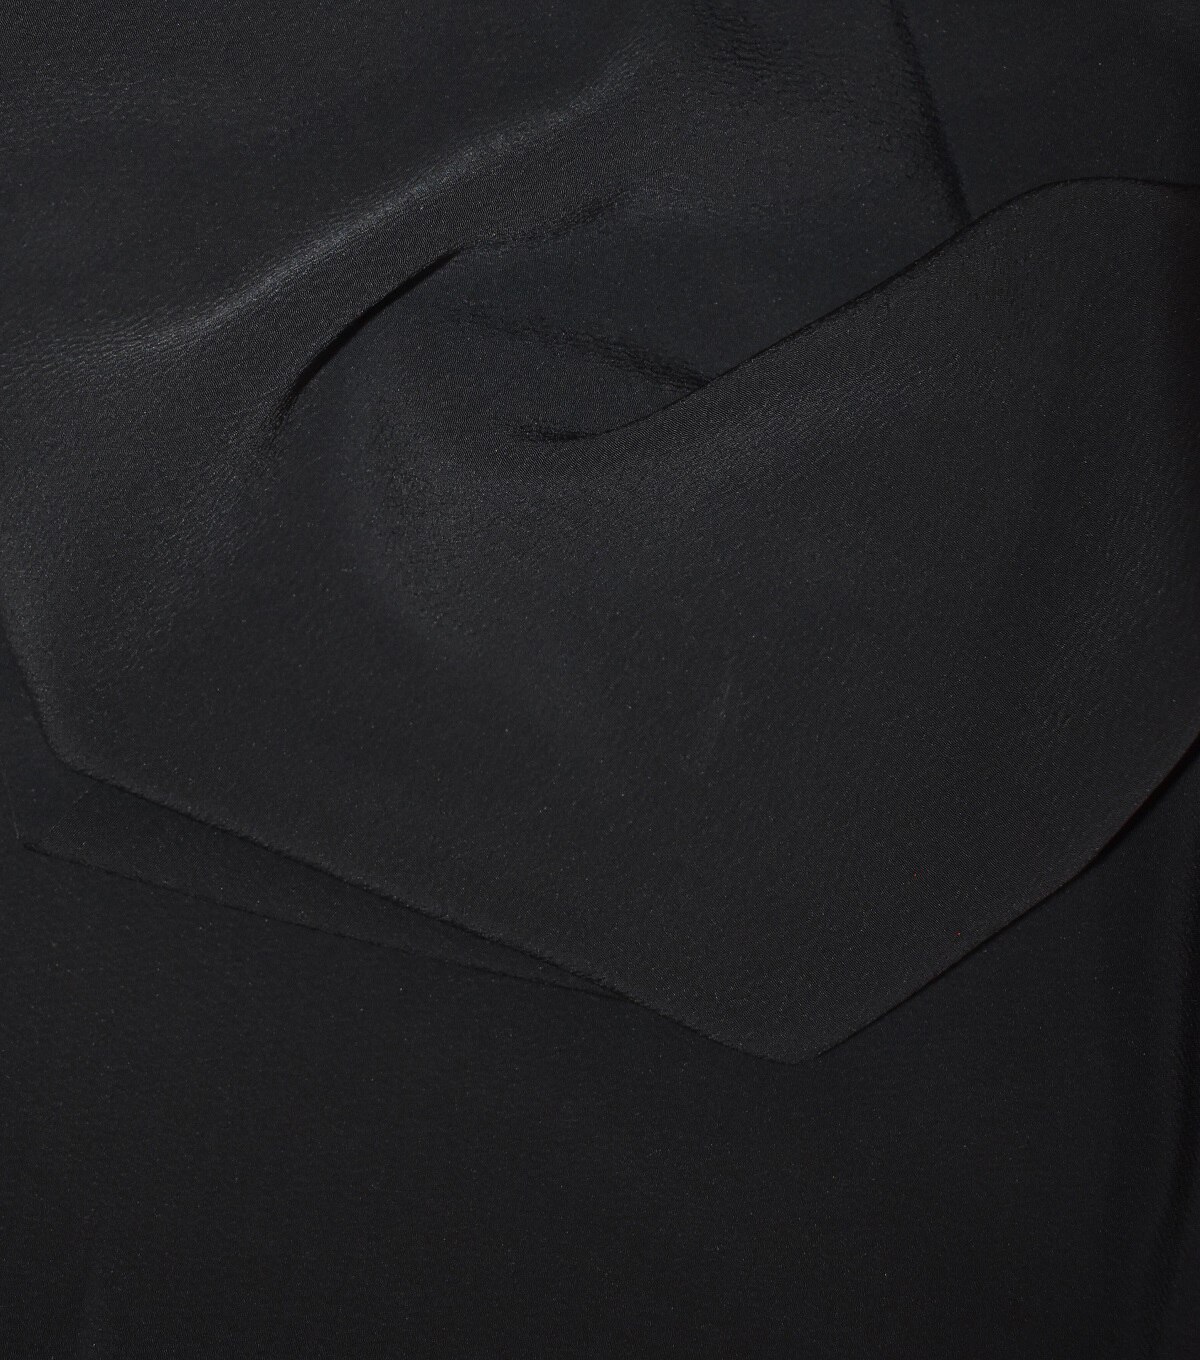 Silky Solids Textured Polyester Crepe Fabric Solids | JOANN